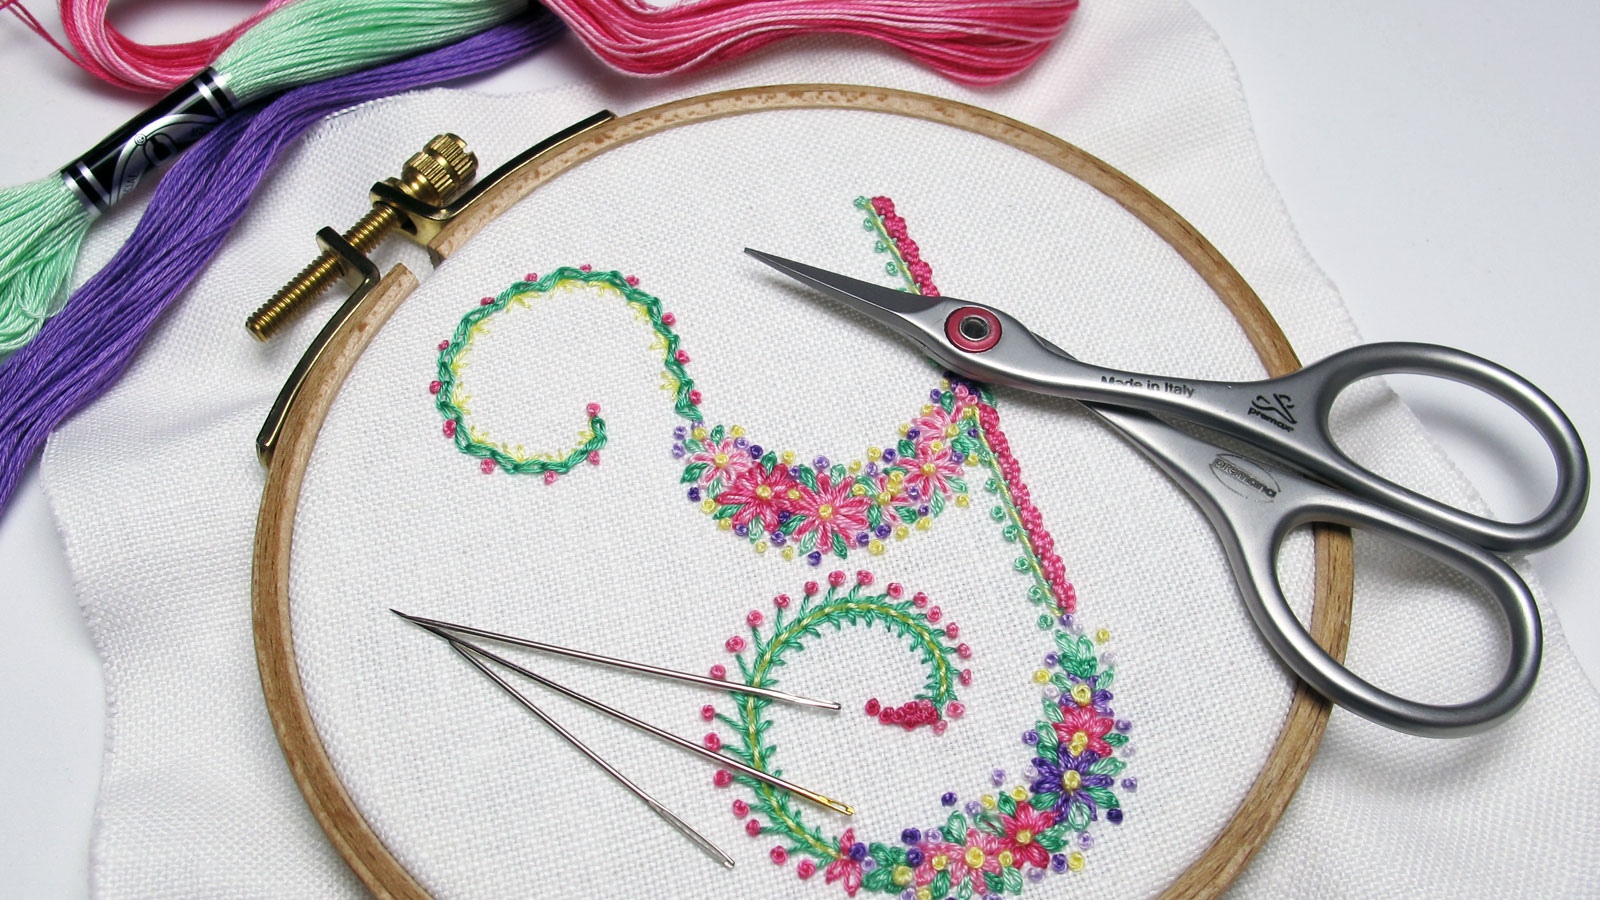 Primitive Hand Embroidery Patterns Needlenthread Tips Tricks And Great Resources For Hand Embroidery